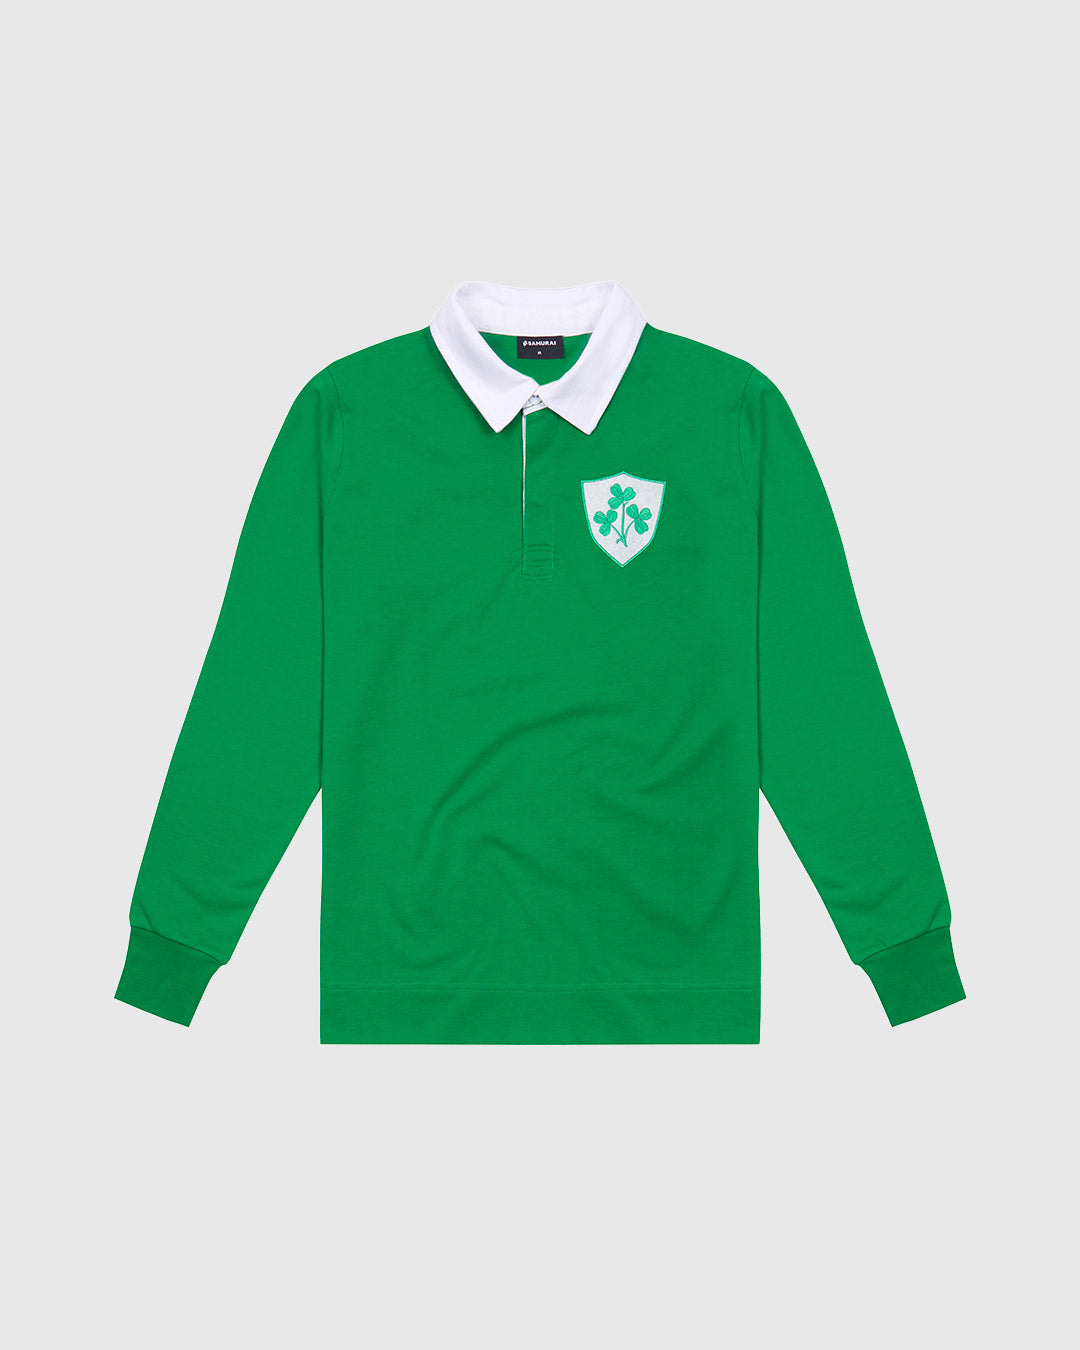 VC: IRL - Women's Vintage Rugby Shirt - Ireland